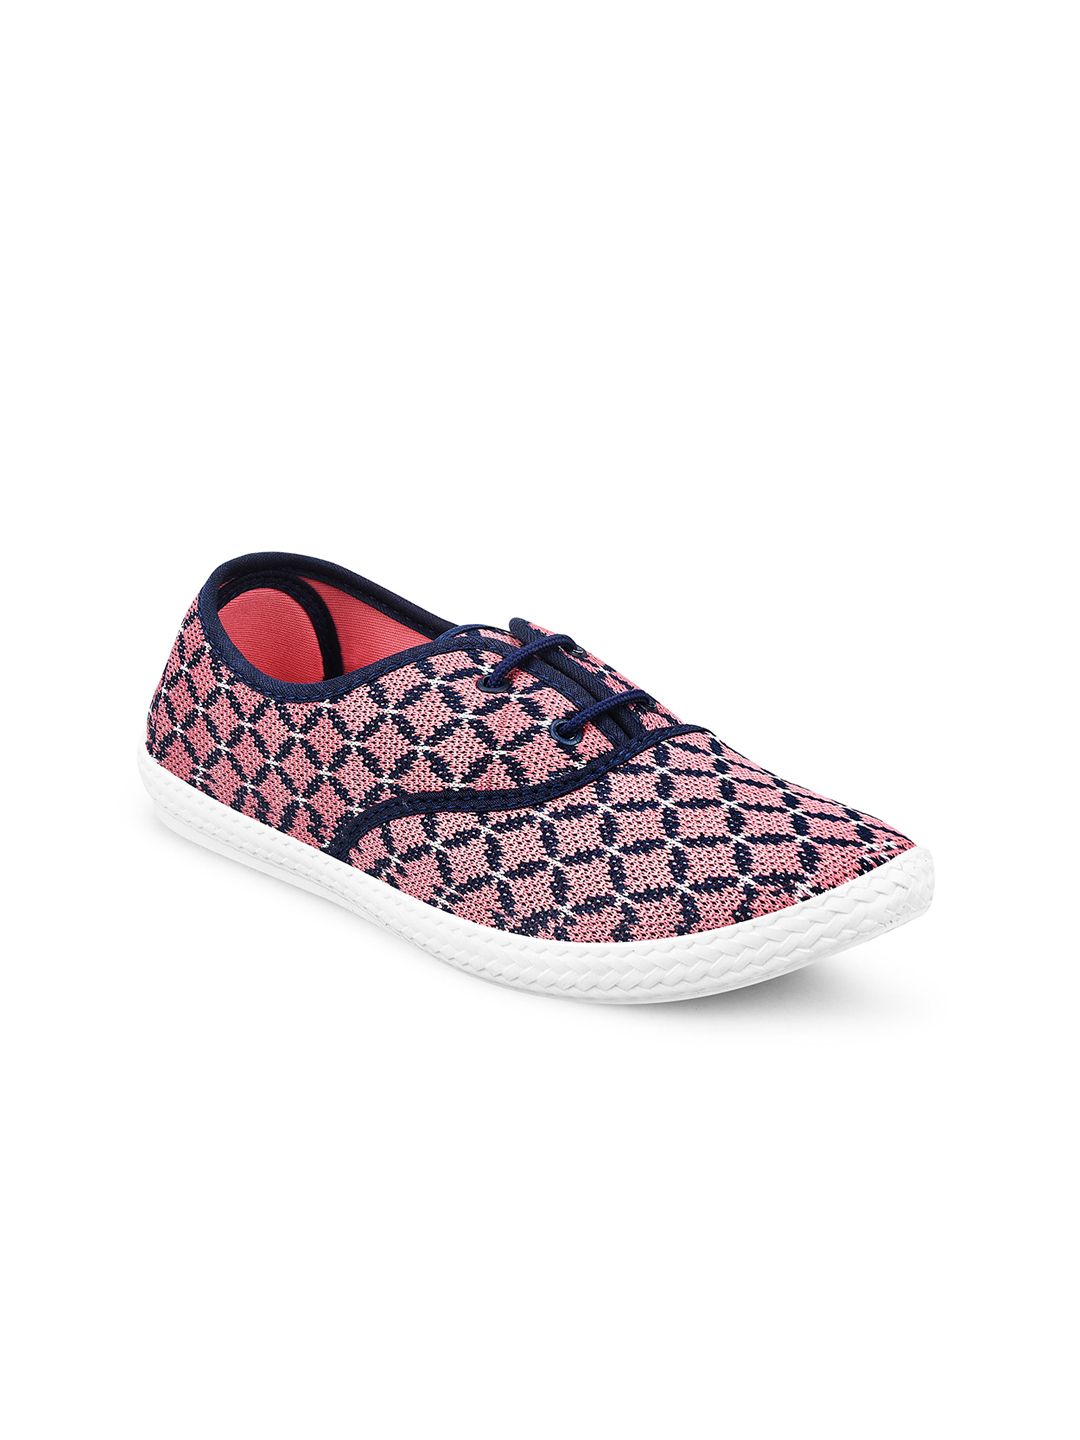 Paragon Women Printed Lightweight Sneakers Price in India